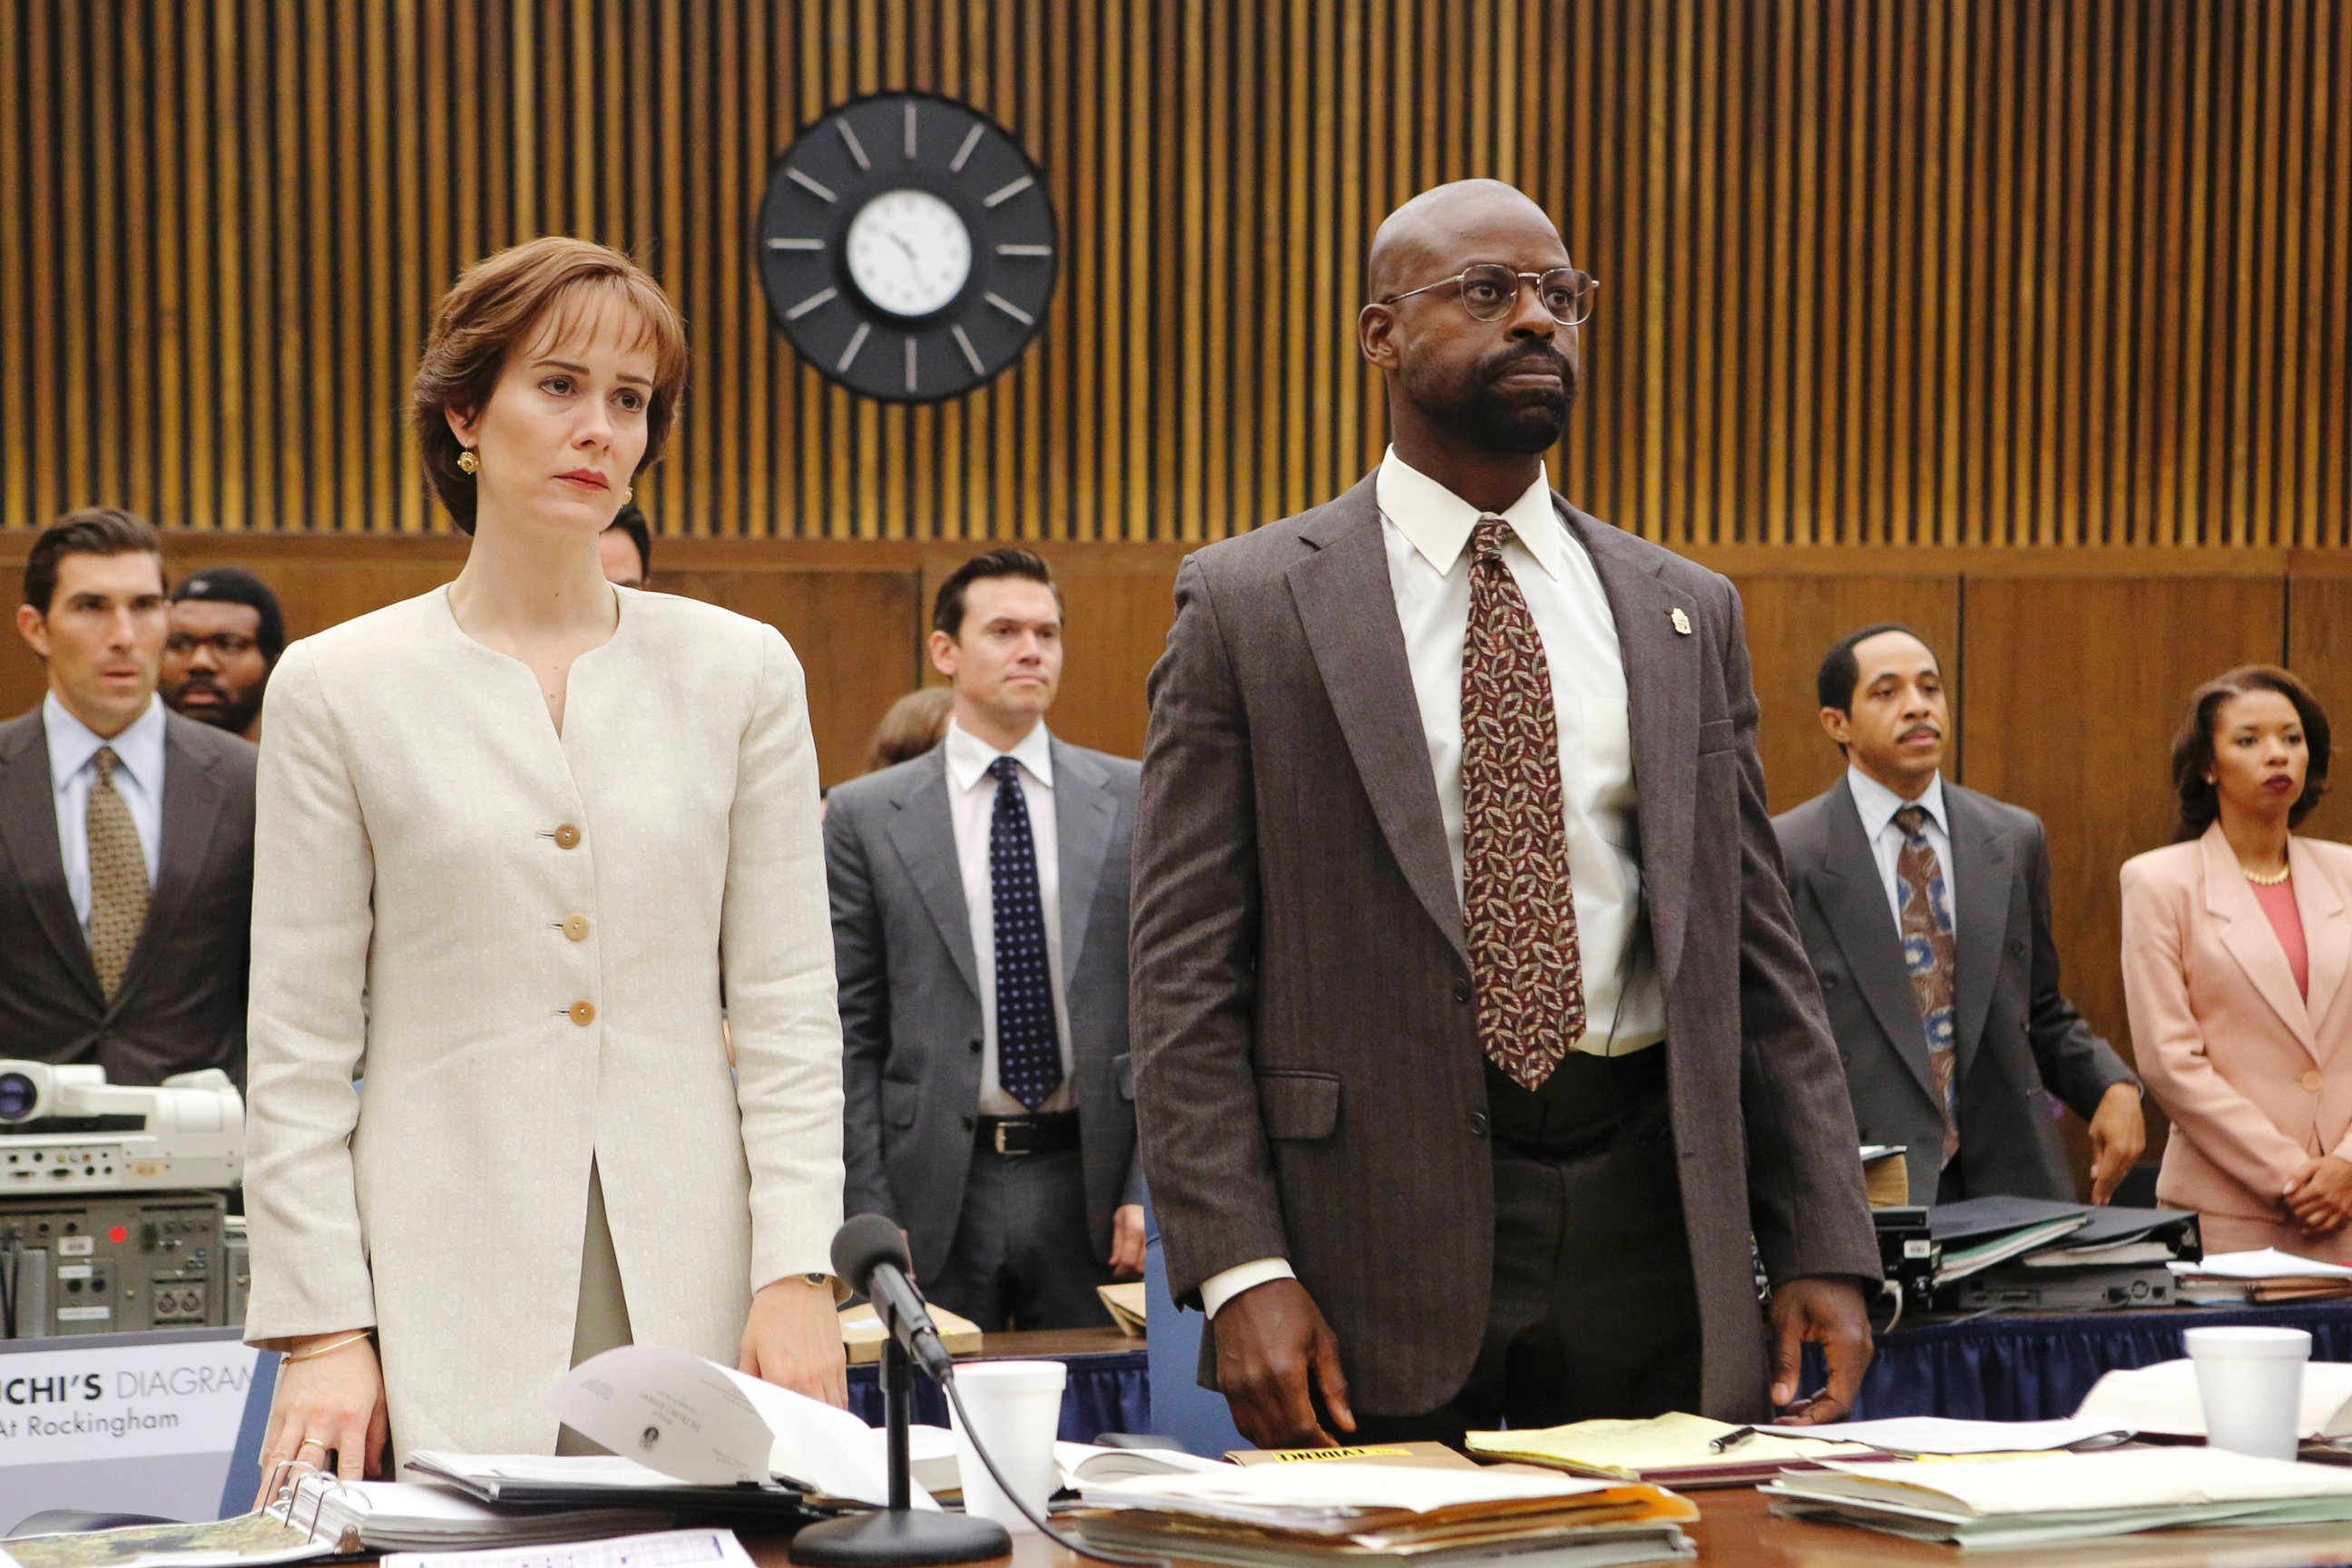 PHOTO: Sarah Paulson as seen here as Marcia Clark and Sterling K. Brown as Christopher Darden in this image from The People v. O.J. Simpson.